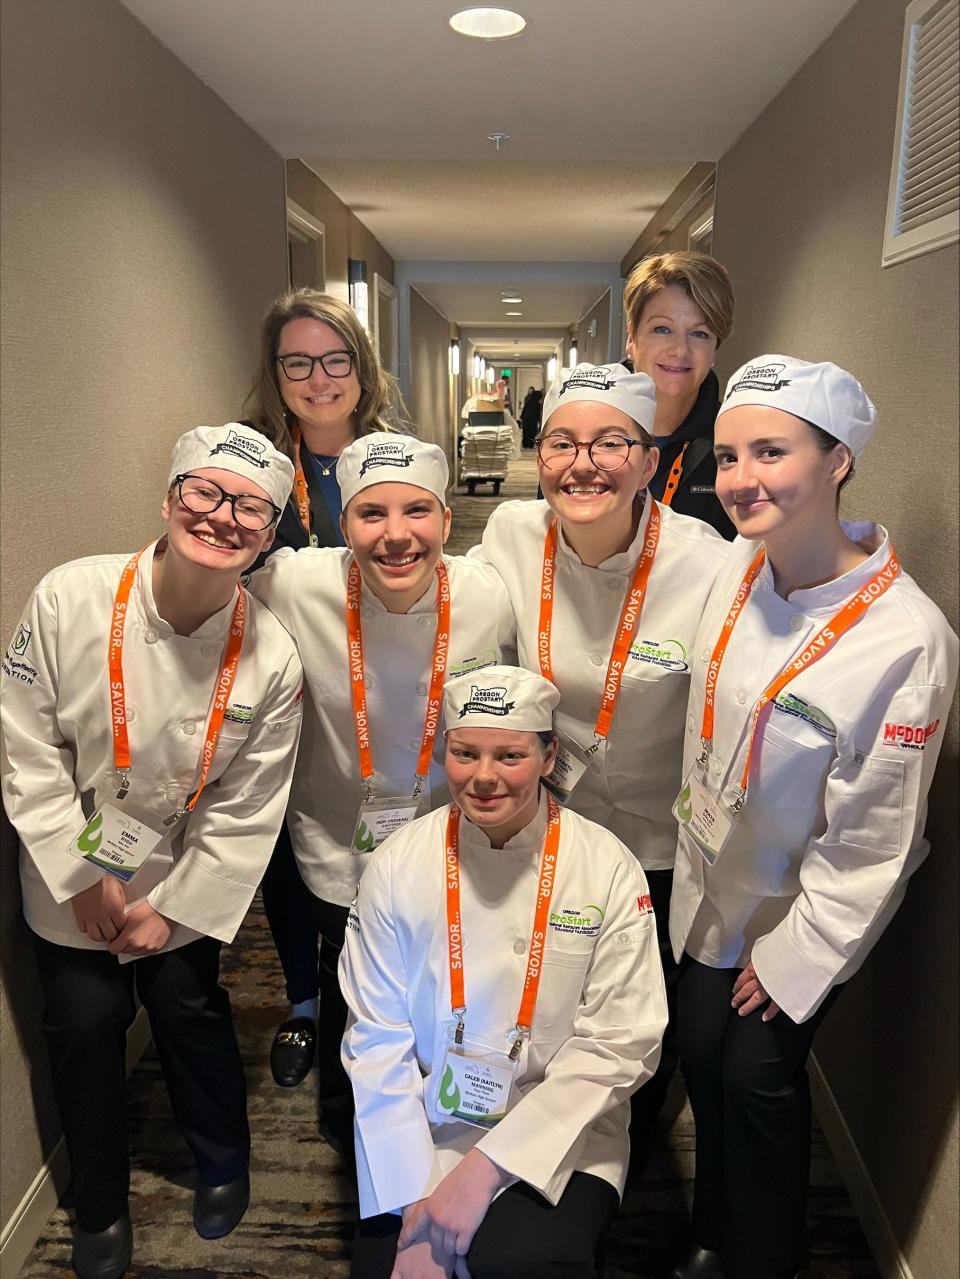 The McNary High School culinary team at the National ProStart Invitational. Pictured are students Maya Orlov, Emma Rygh, Elizabeth Williams, Indiana Gauthier, Kaitlyn Manning and ProStart manager Courtney Smith and teacher Wendy Bennett.